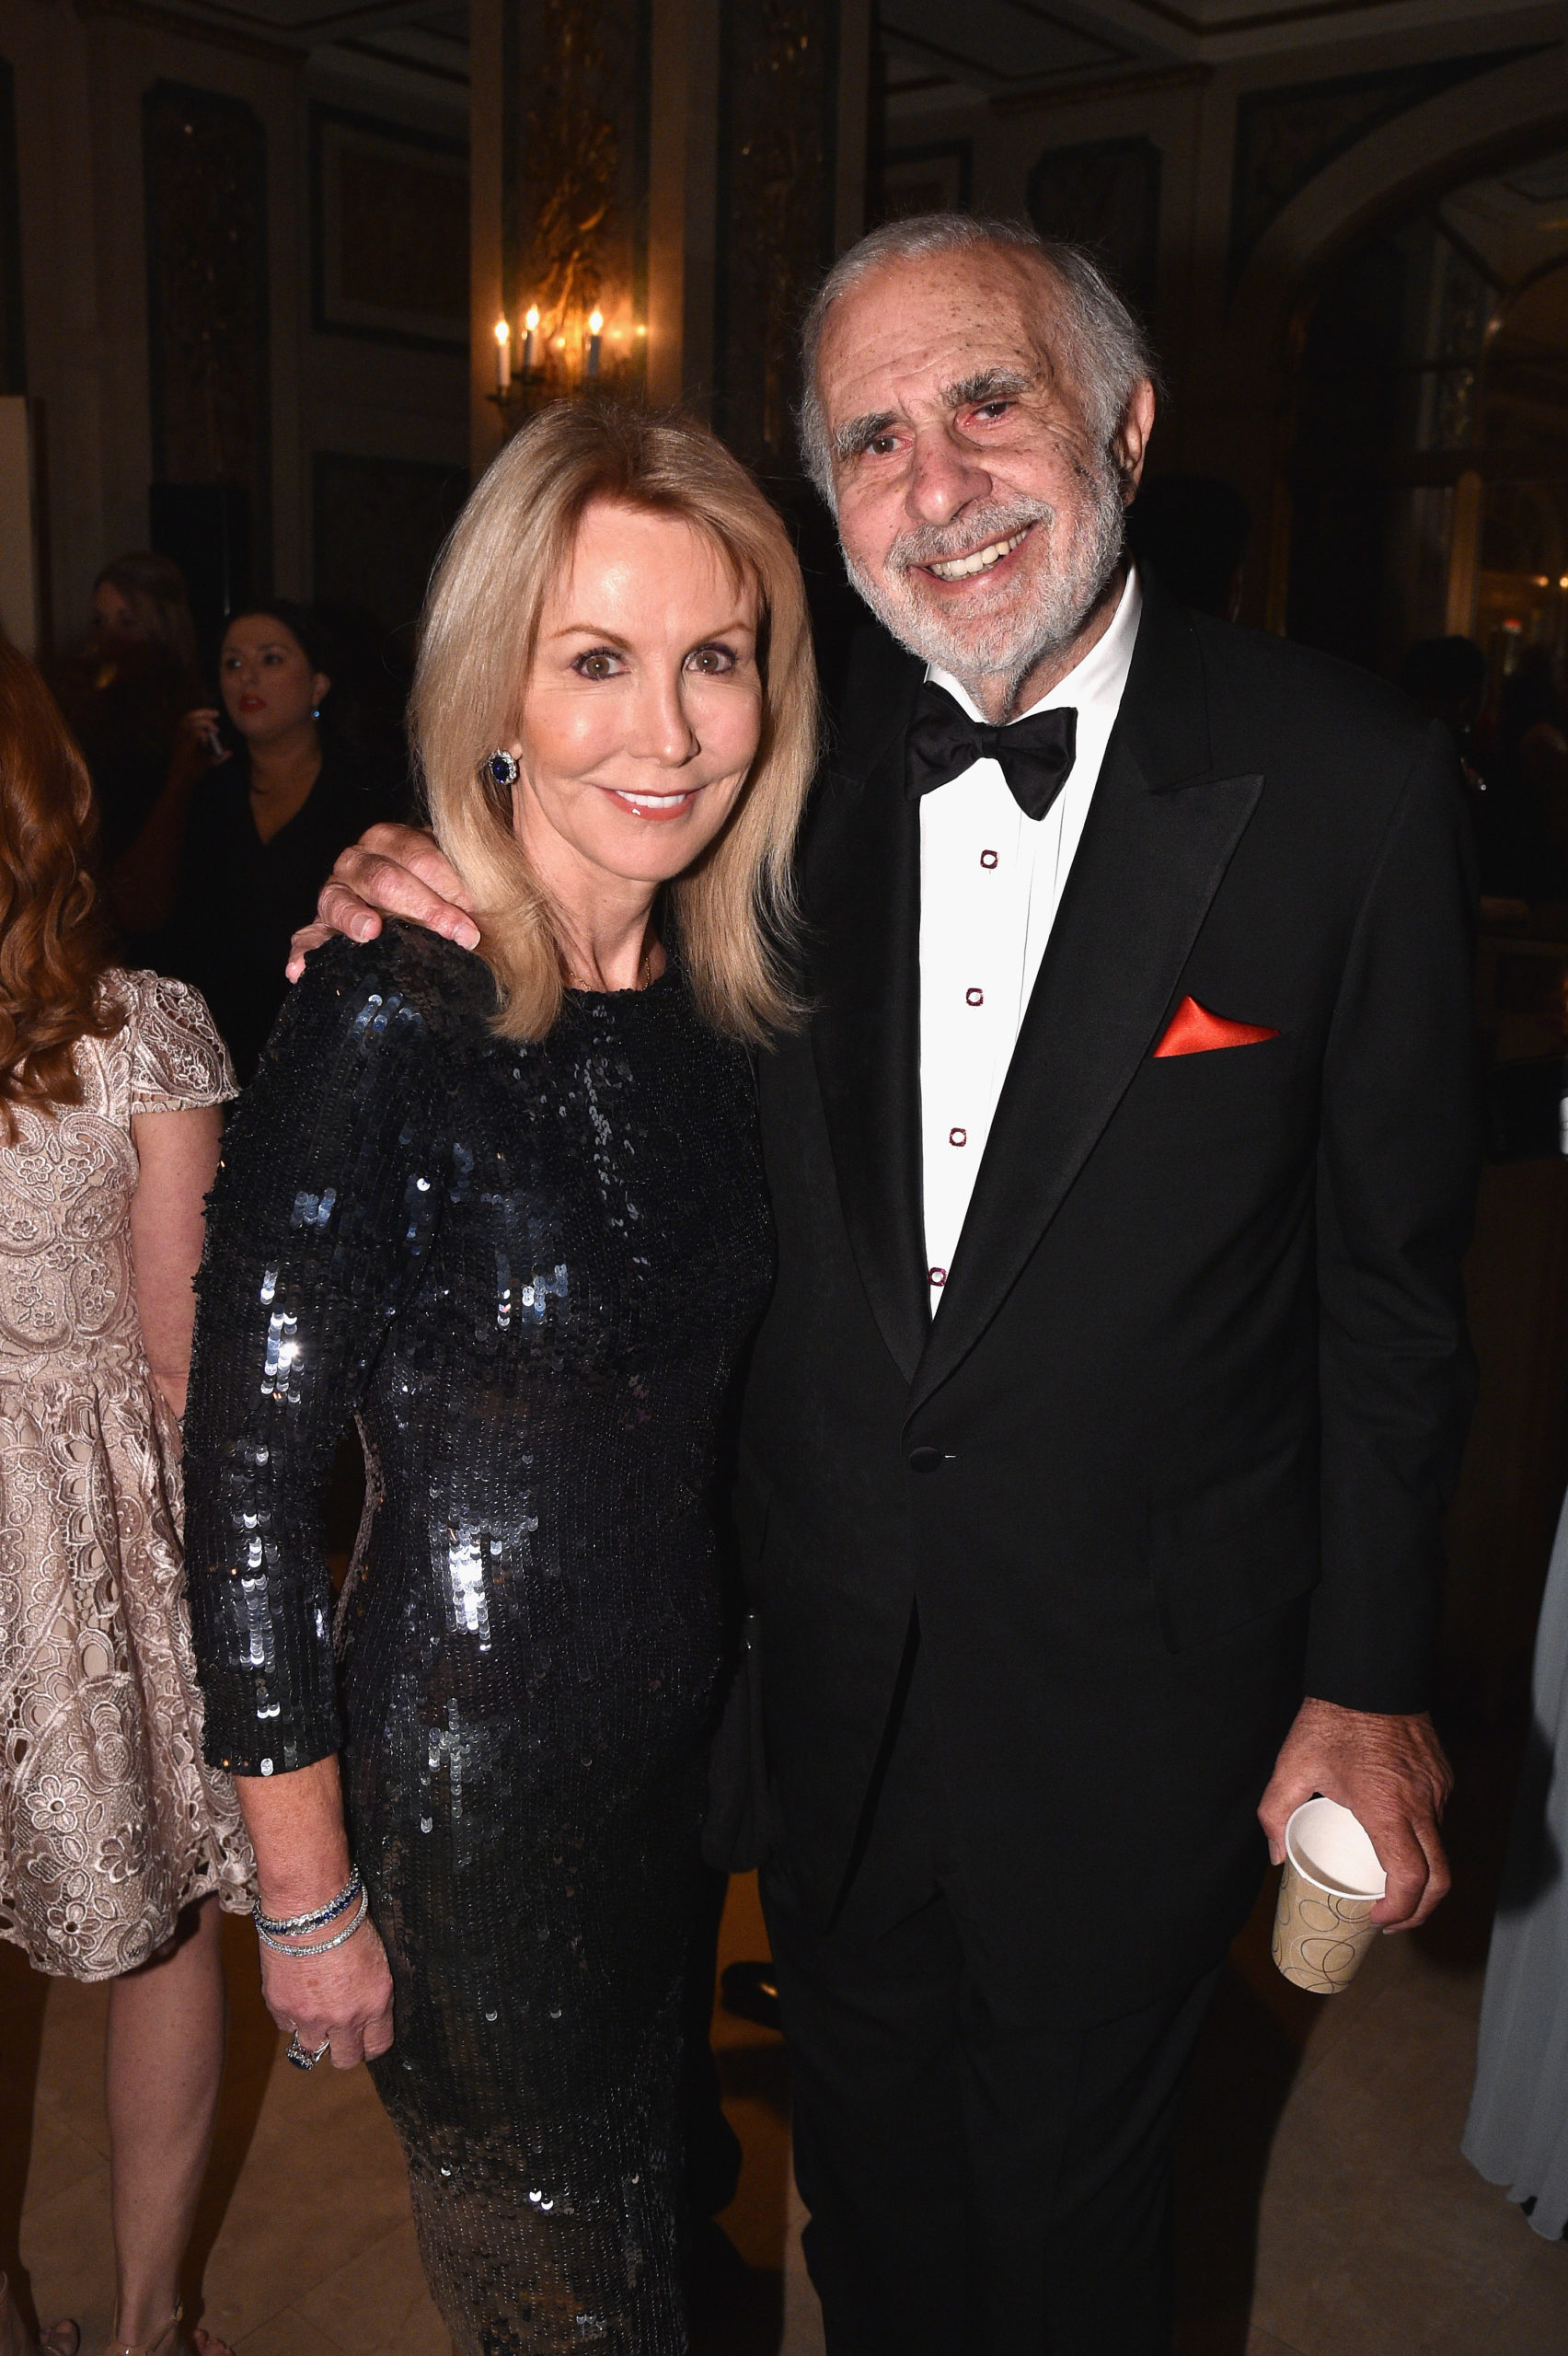 Gail and Carl Icahn attend the ASPCA hosted 20th Annual Bergh Ball at The Plaza Hotel on April 20, 2017 in New York City. (Photo by Bryan Bedder/Getty Images for ASPCA)